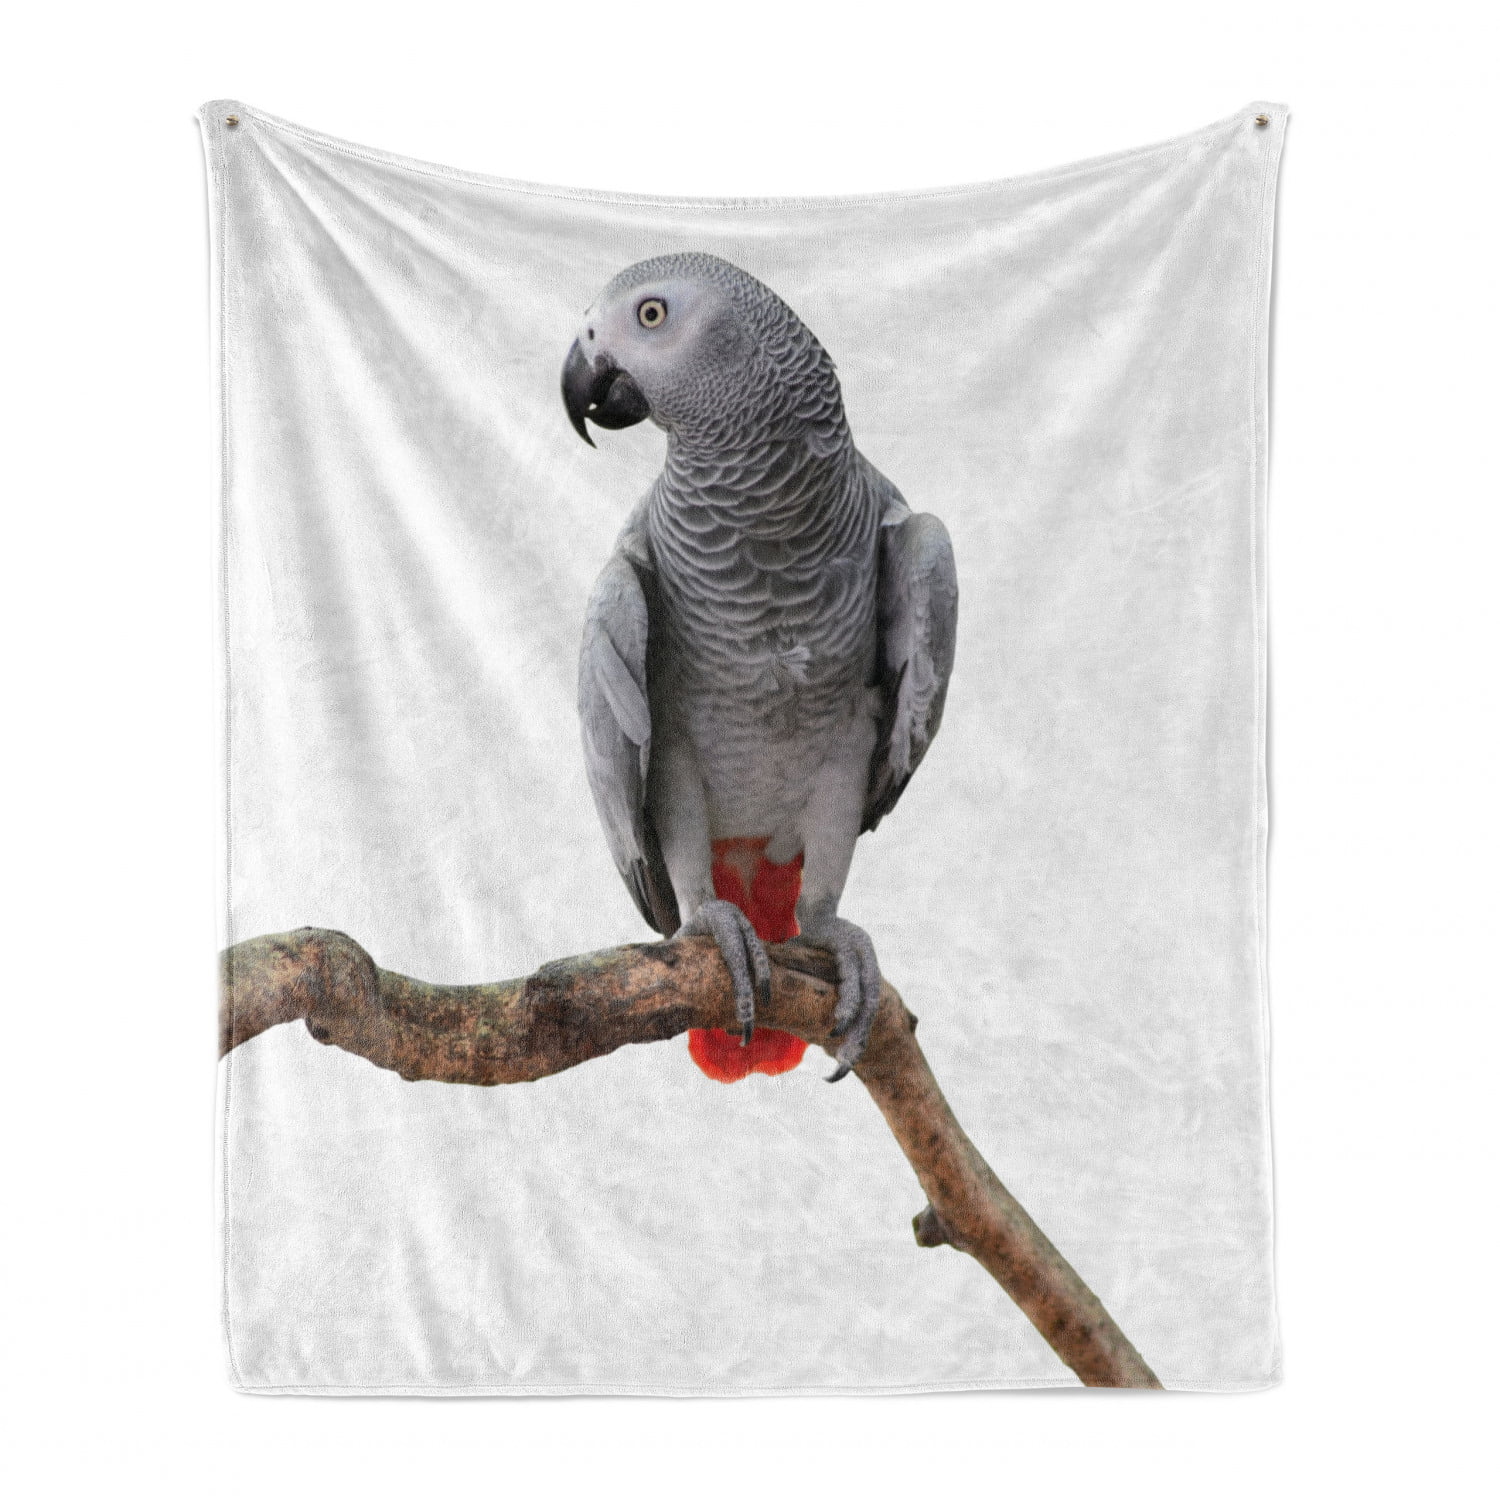 Multicolor Ambesonne Birds Soft Flannel Fleece Throw Blanket 60 x 80 Cozy Plush for Indoor and Outdoor Use Avian Animal Silhouettes with a Dandelion Scene from Nature Fauna and Flora Pattern